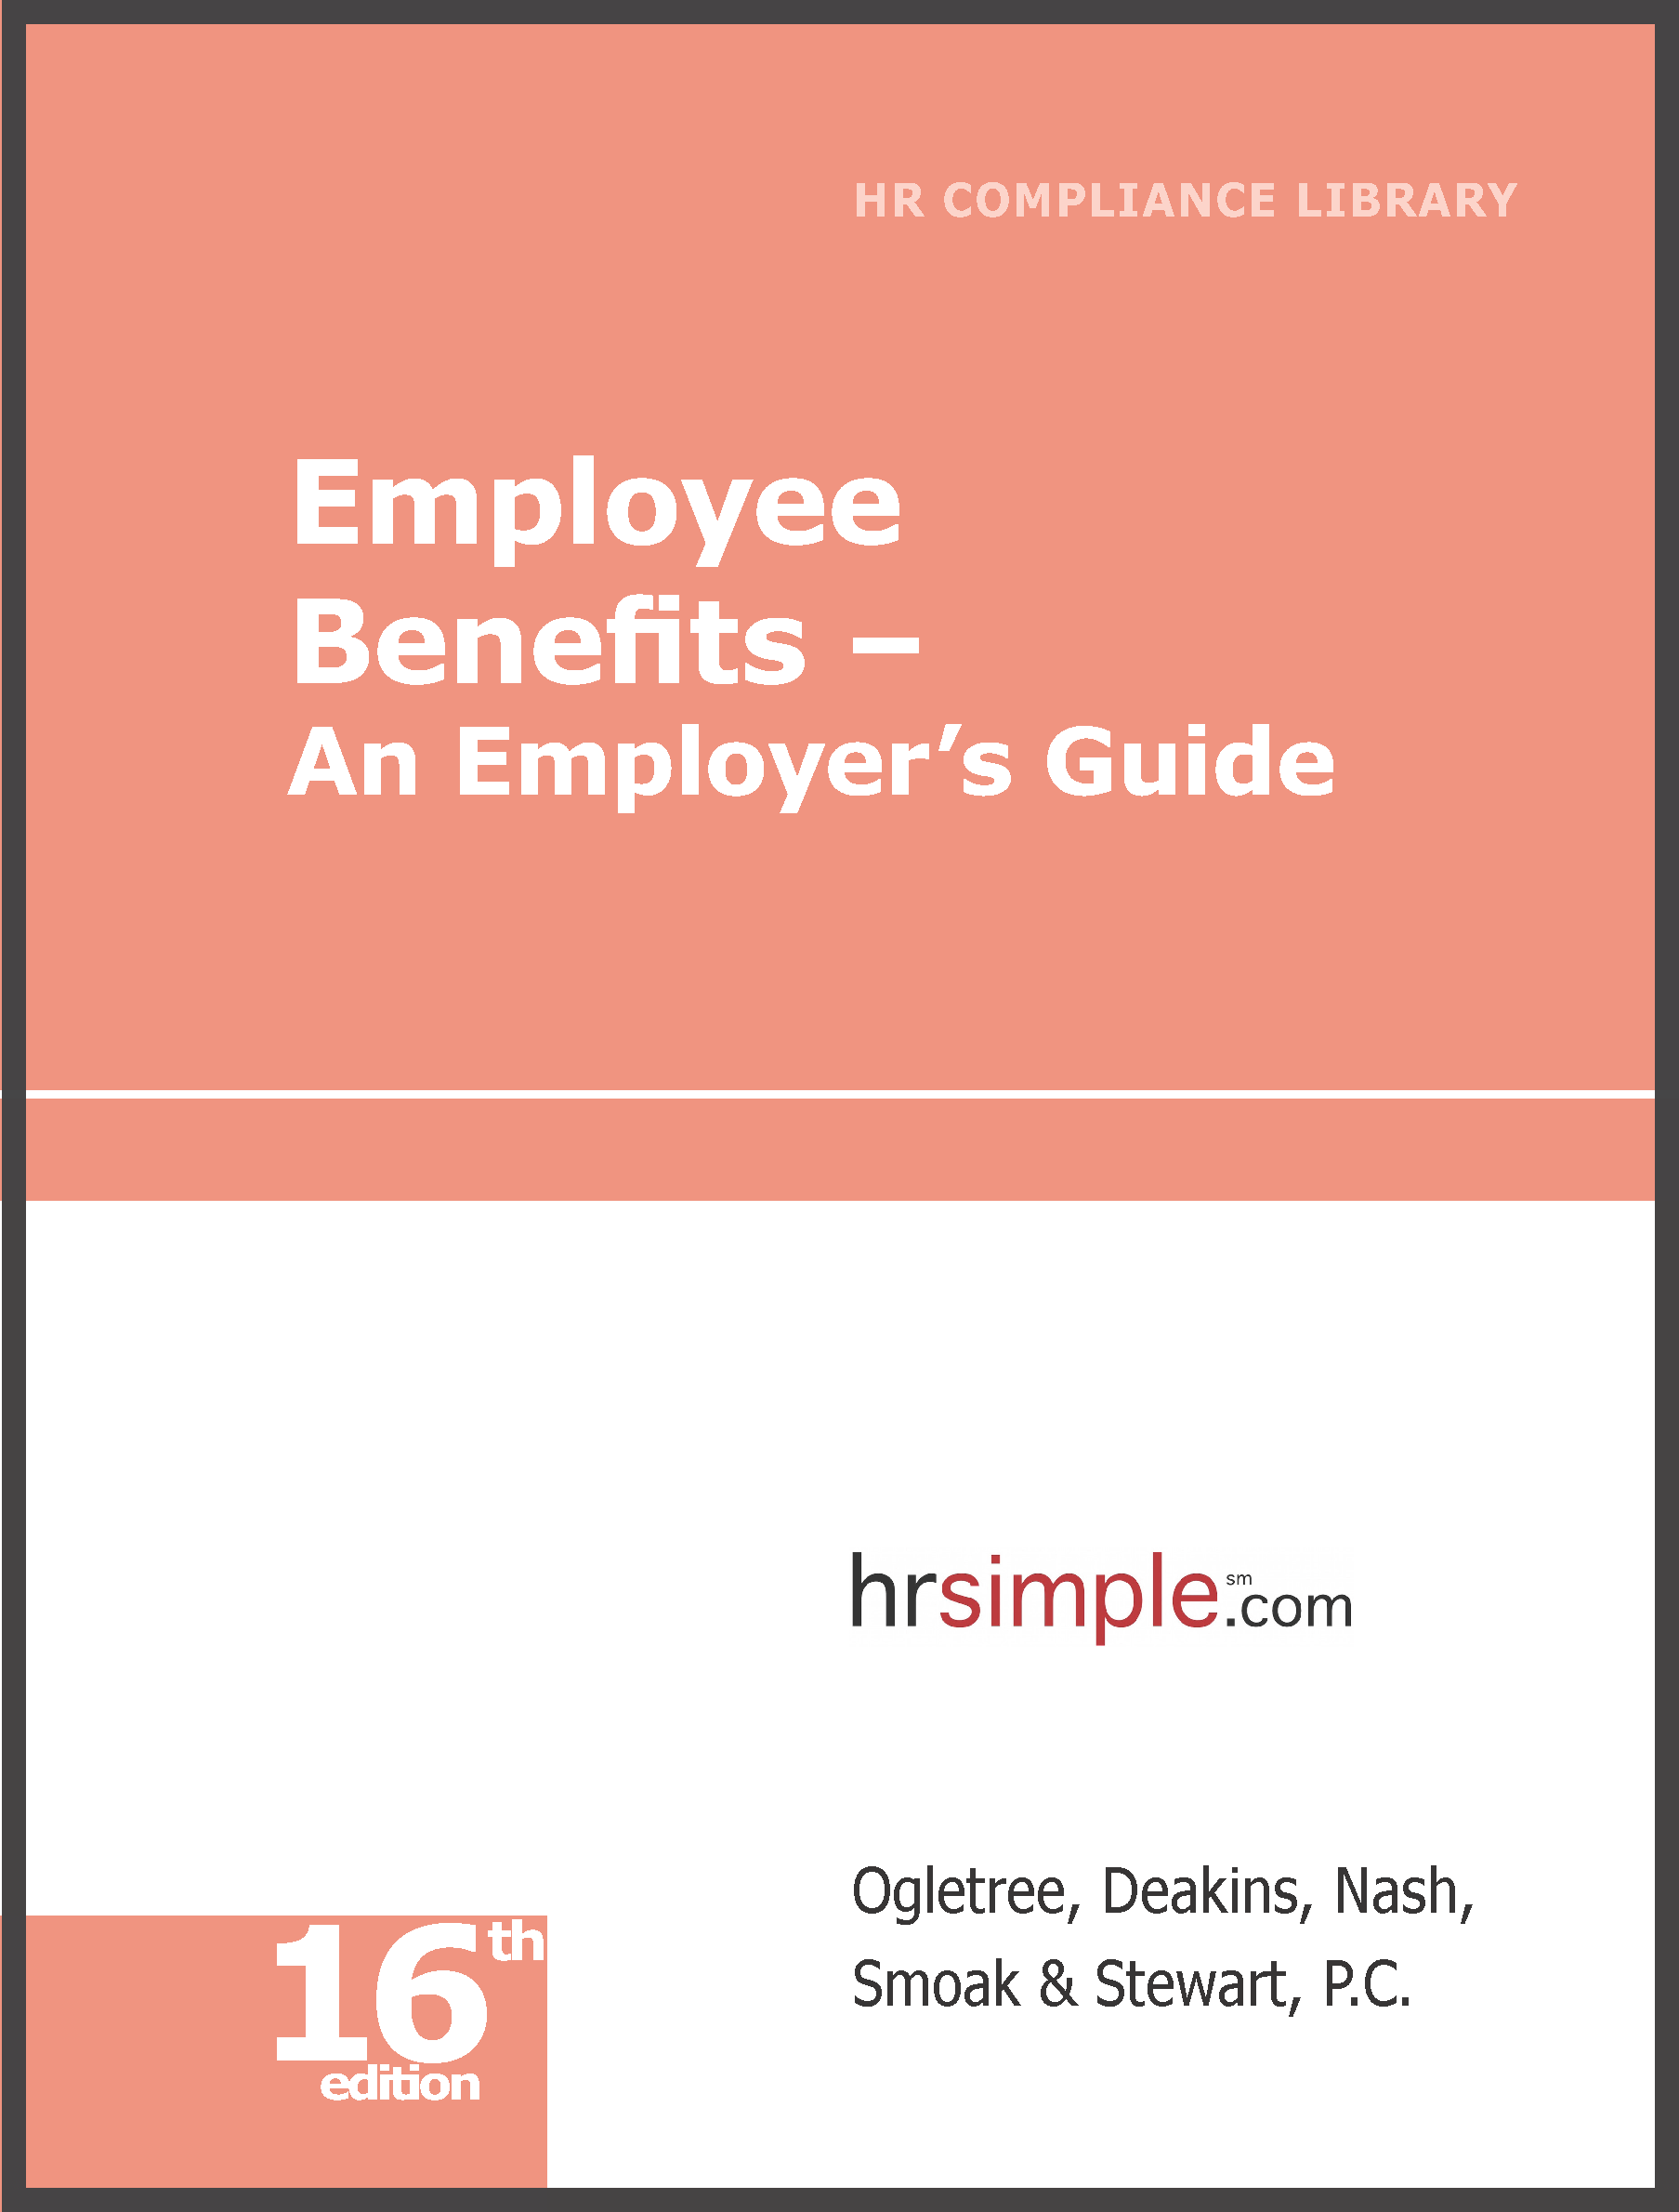 Employee Benefits — An Employer's Guide—Online Only employment law image, remote work, labor laws, employment laws, right to work, order of protection, minimum wage